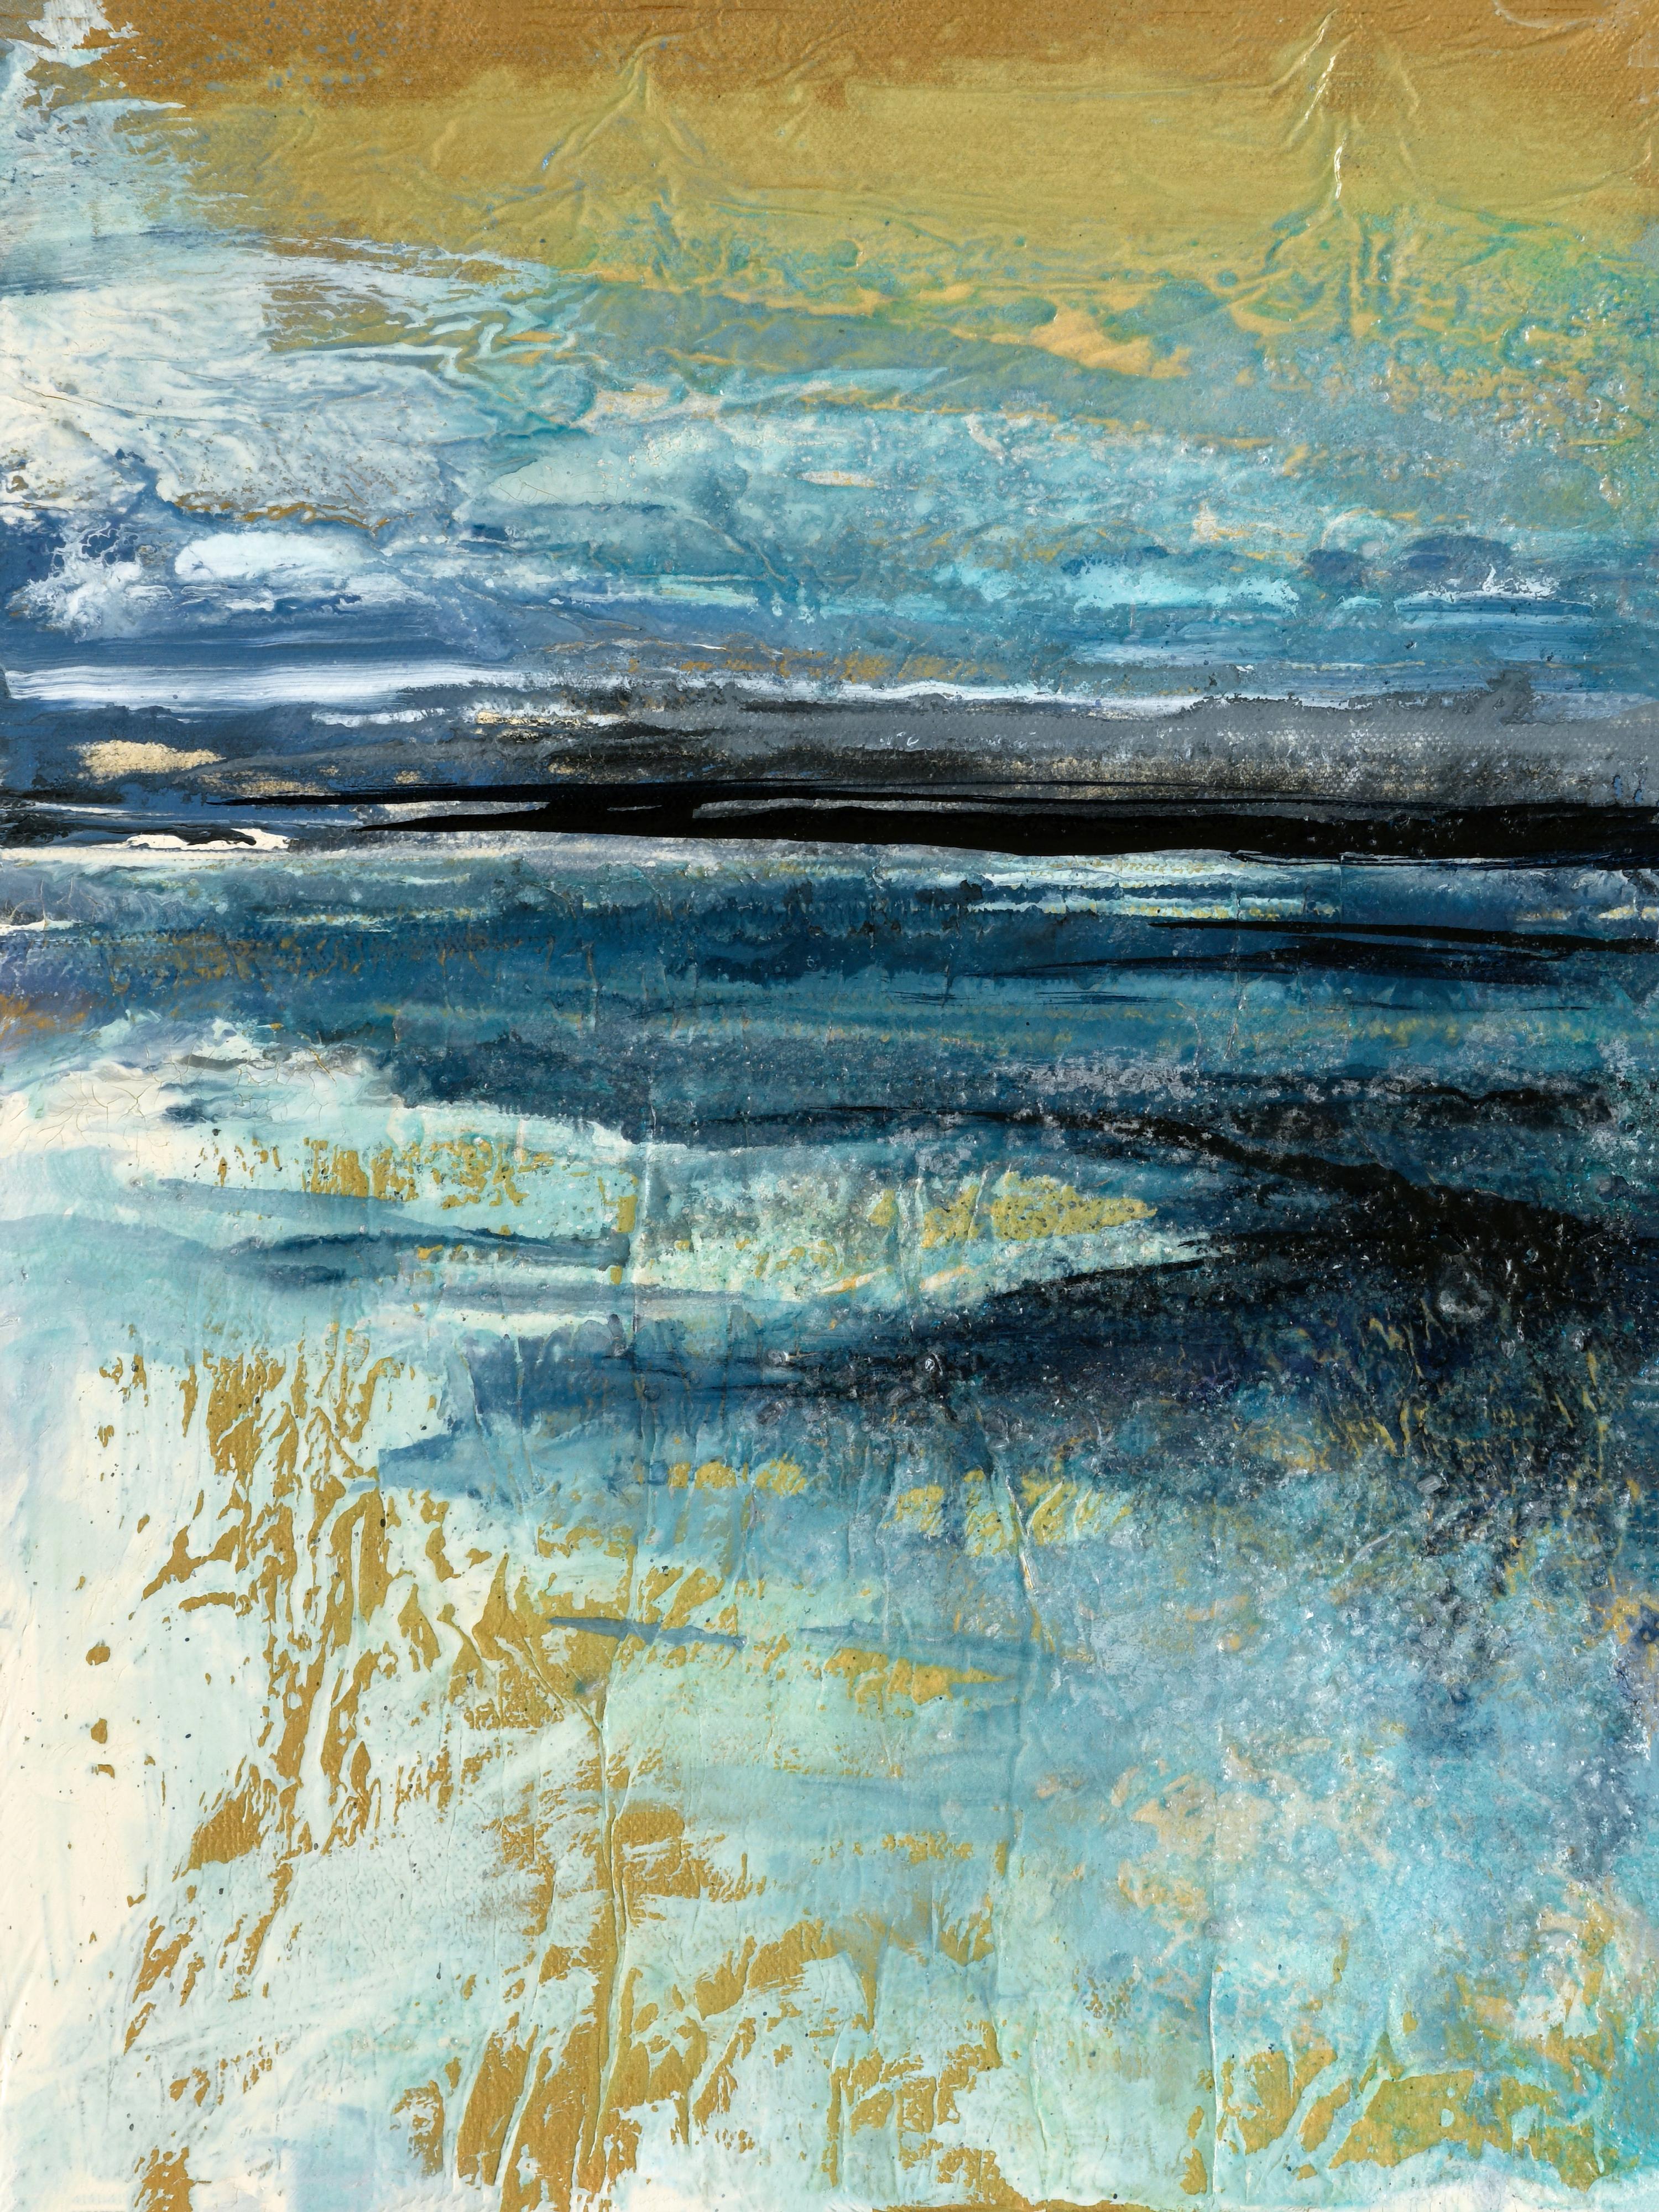 Coastal Landscape Study 3, Original Contemporary Abstract Landscape Painting
16" x 12" x 1.5" (HxWxD) Mixed Media on Canvas

A lovely abstract seascape study by artist Julia Di Sano, this small-format nature-inspired painting features a soft color